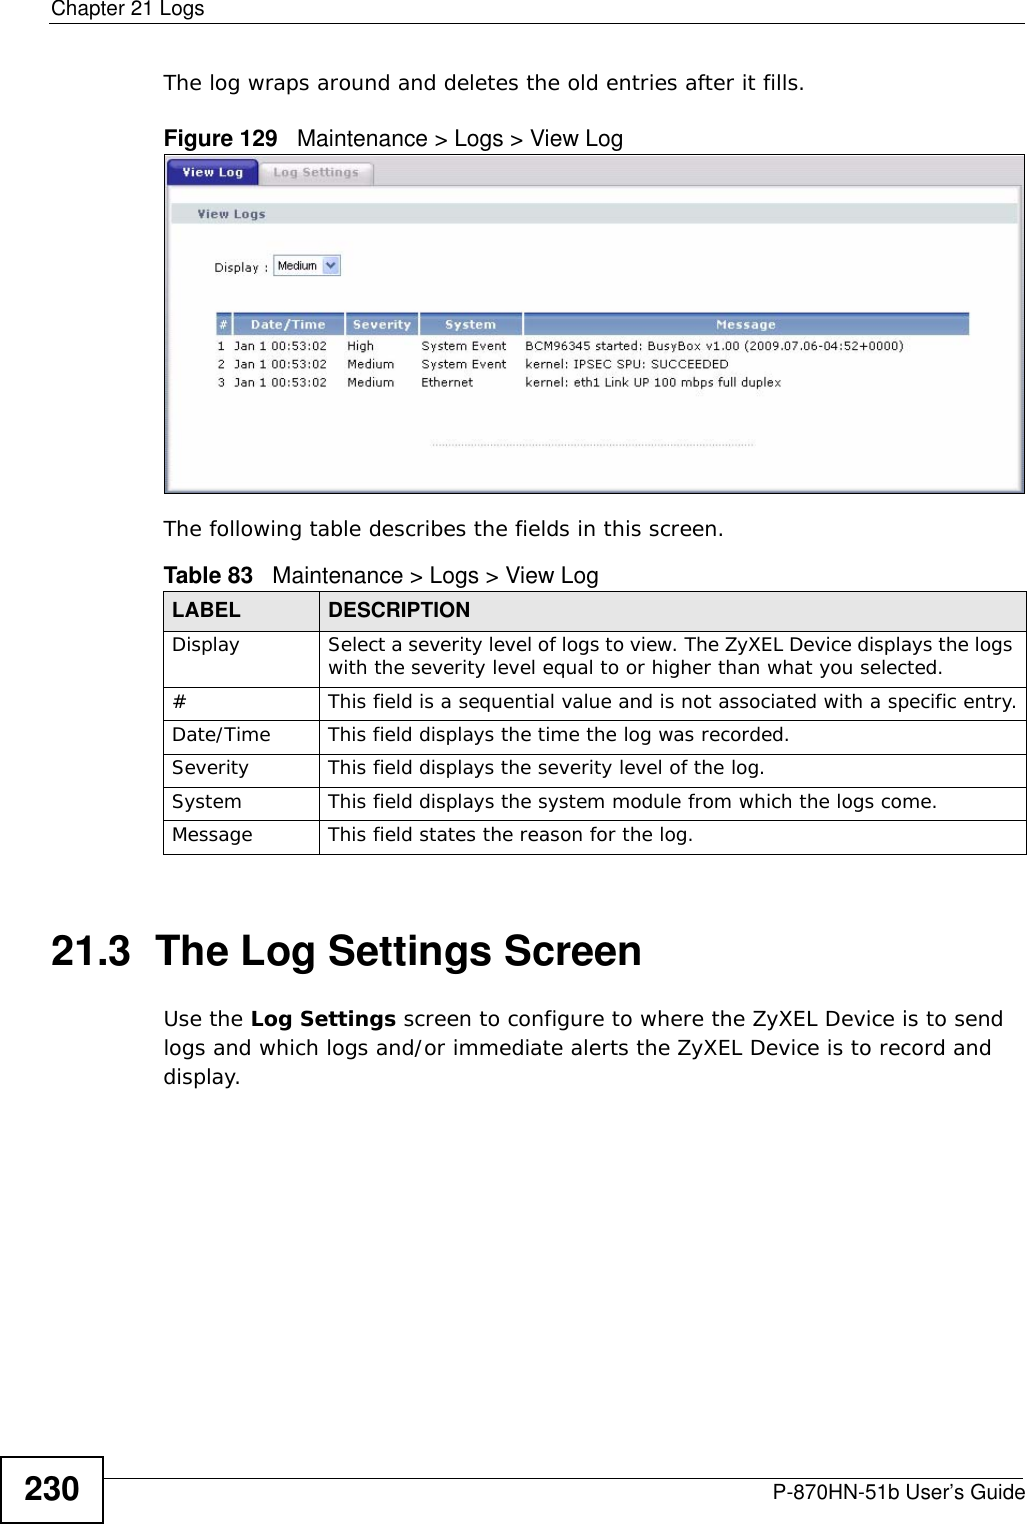 Chapter 21 LogsP-870HN-51b User’s Guide230The log wraps around and deletes the old entries after it fills.Figure 129   Maintenance &gt; Logs &gt; View LogThe following table describes the fields in this screen.  21.3  The Log Settings ScreenUse the Log Settings screen to configure to where the ZyXEL Device is to send logs and which logs and/or immediate alerts the ZyXEL Device is to record and display.  Table 83   Maintenance &gt; Logs &gt; View LogLABEL DESCRIPTIONDisplay  Select a severity level of logs to view. The ZyXEL Device displays the logs with the severity level equal to or higher than what you selected.#This field is a sequential value and is not associated with a specific entry.Date/Time  This field displays the time the log was recorded. Severity  This field displays the severity level of the log.System This field displays the system module from which the logs come.Message This field states the reason for the log.